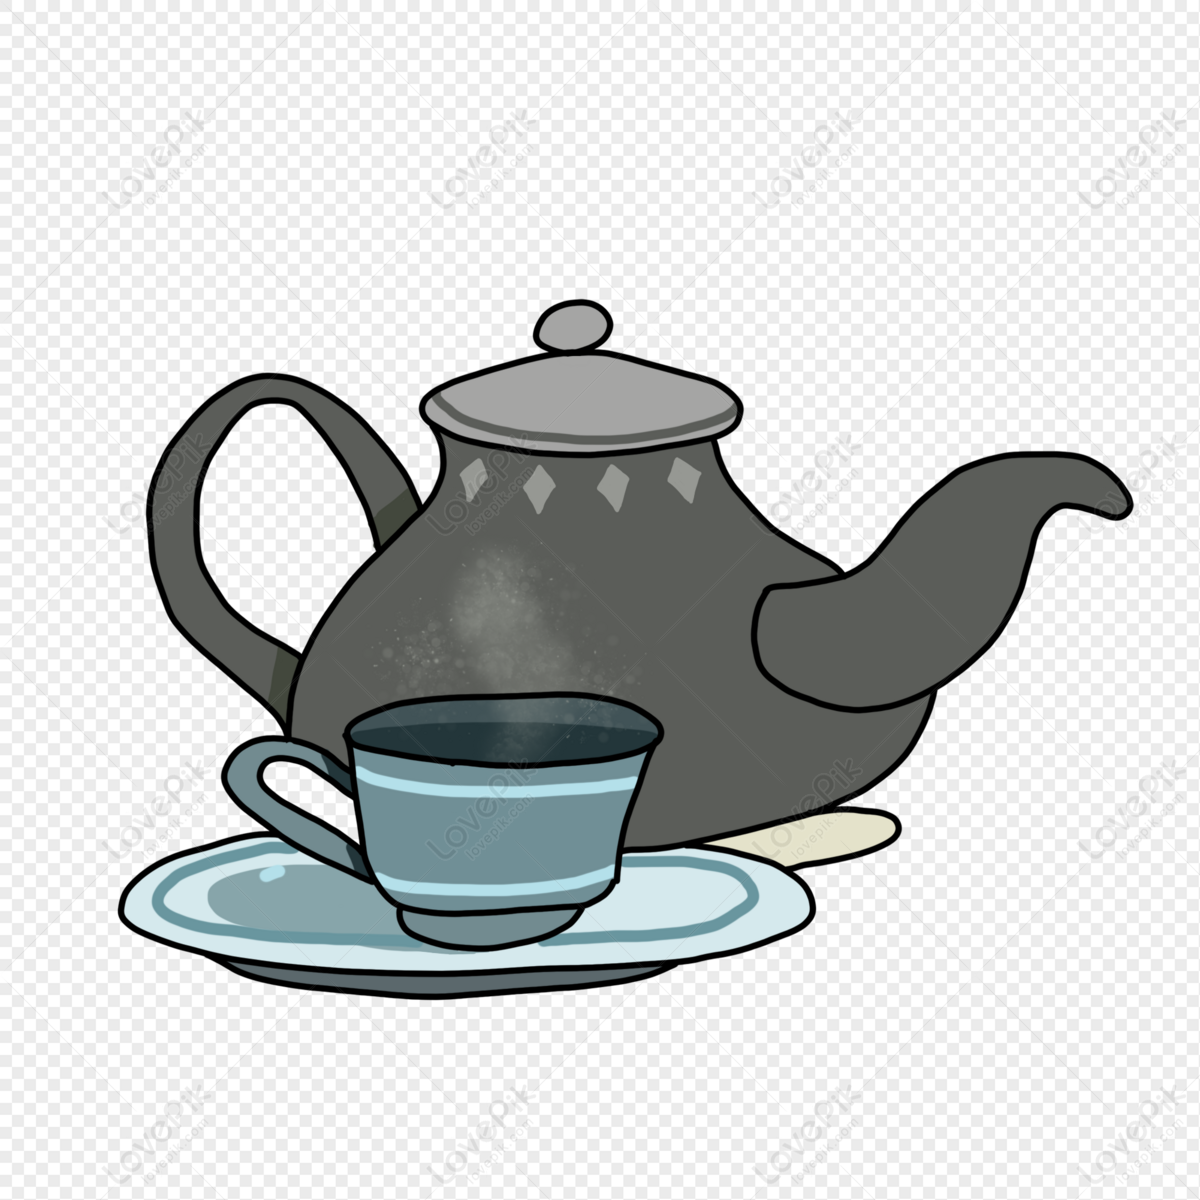 Premium Vector  A kettle and a glass of tea on a brown background.